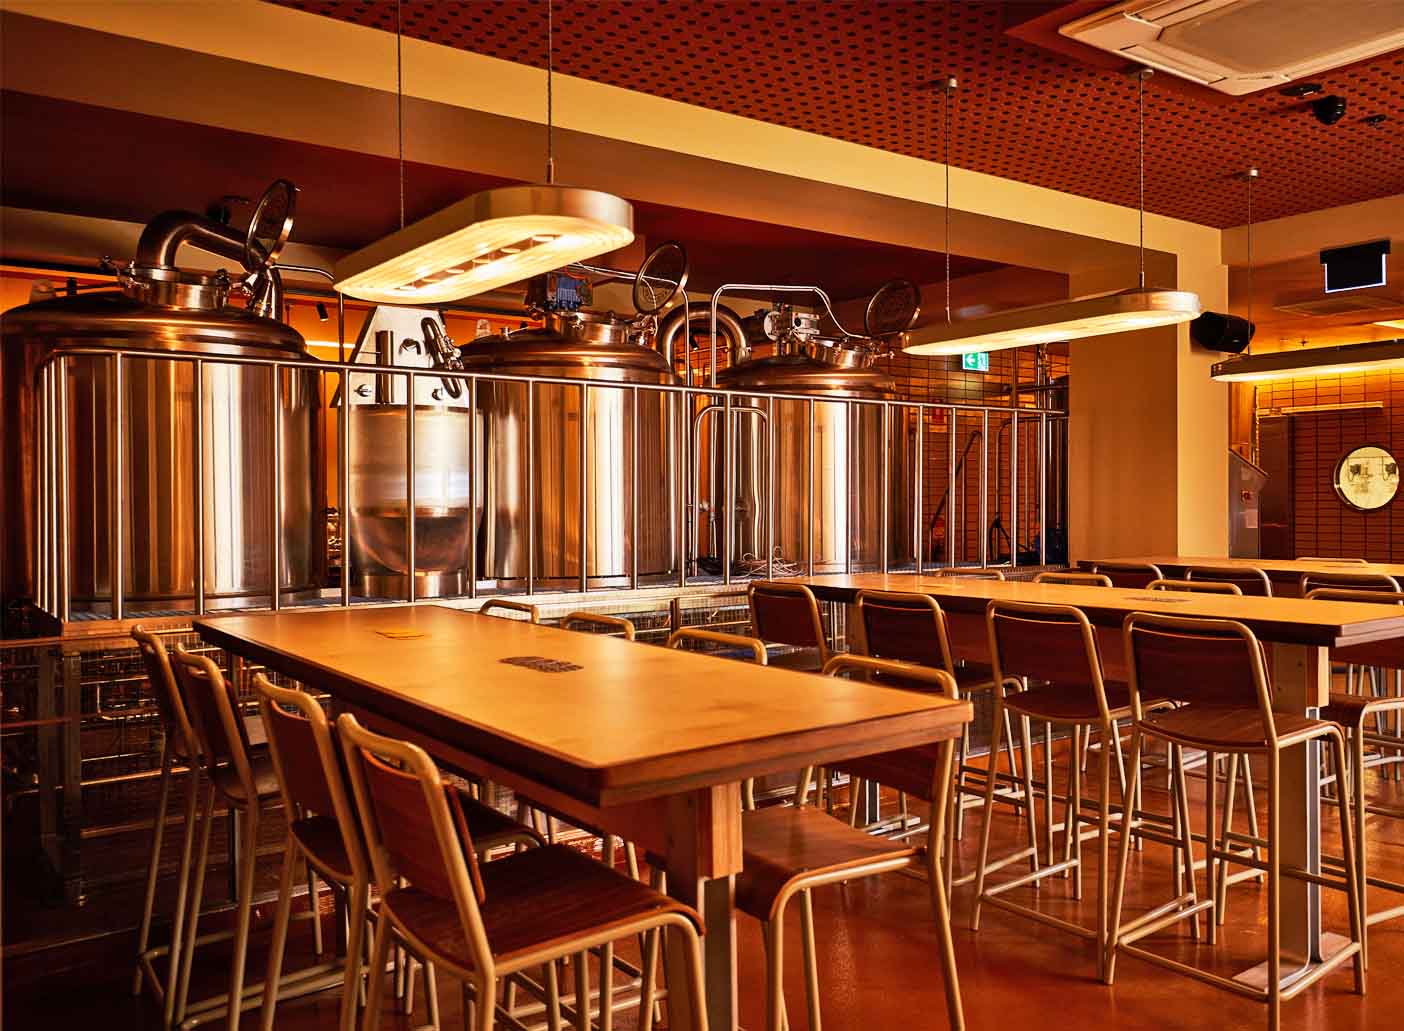 Curly Lewis Brewing <br> Brewery Dining